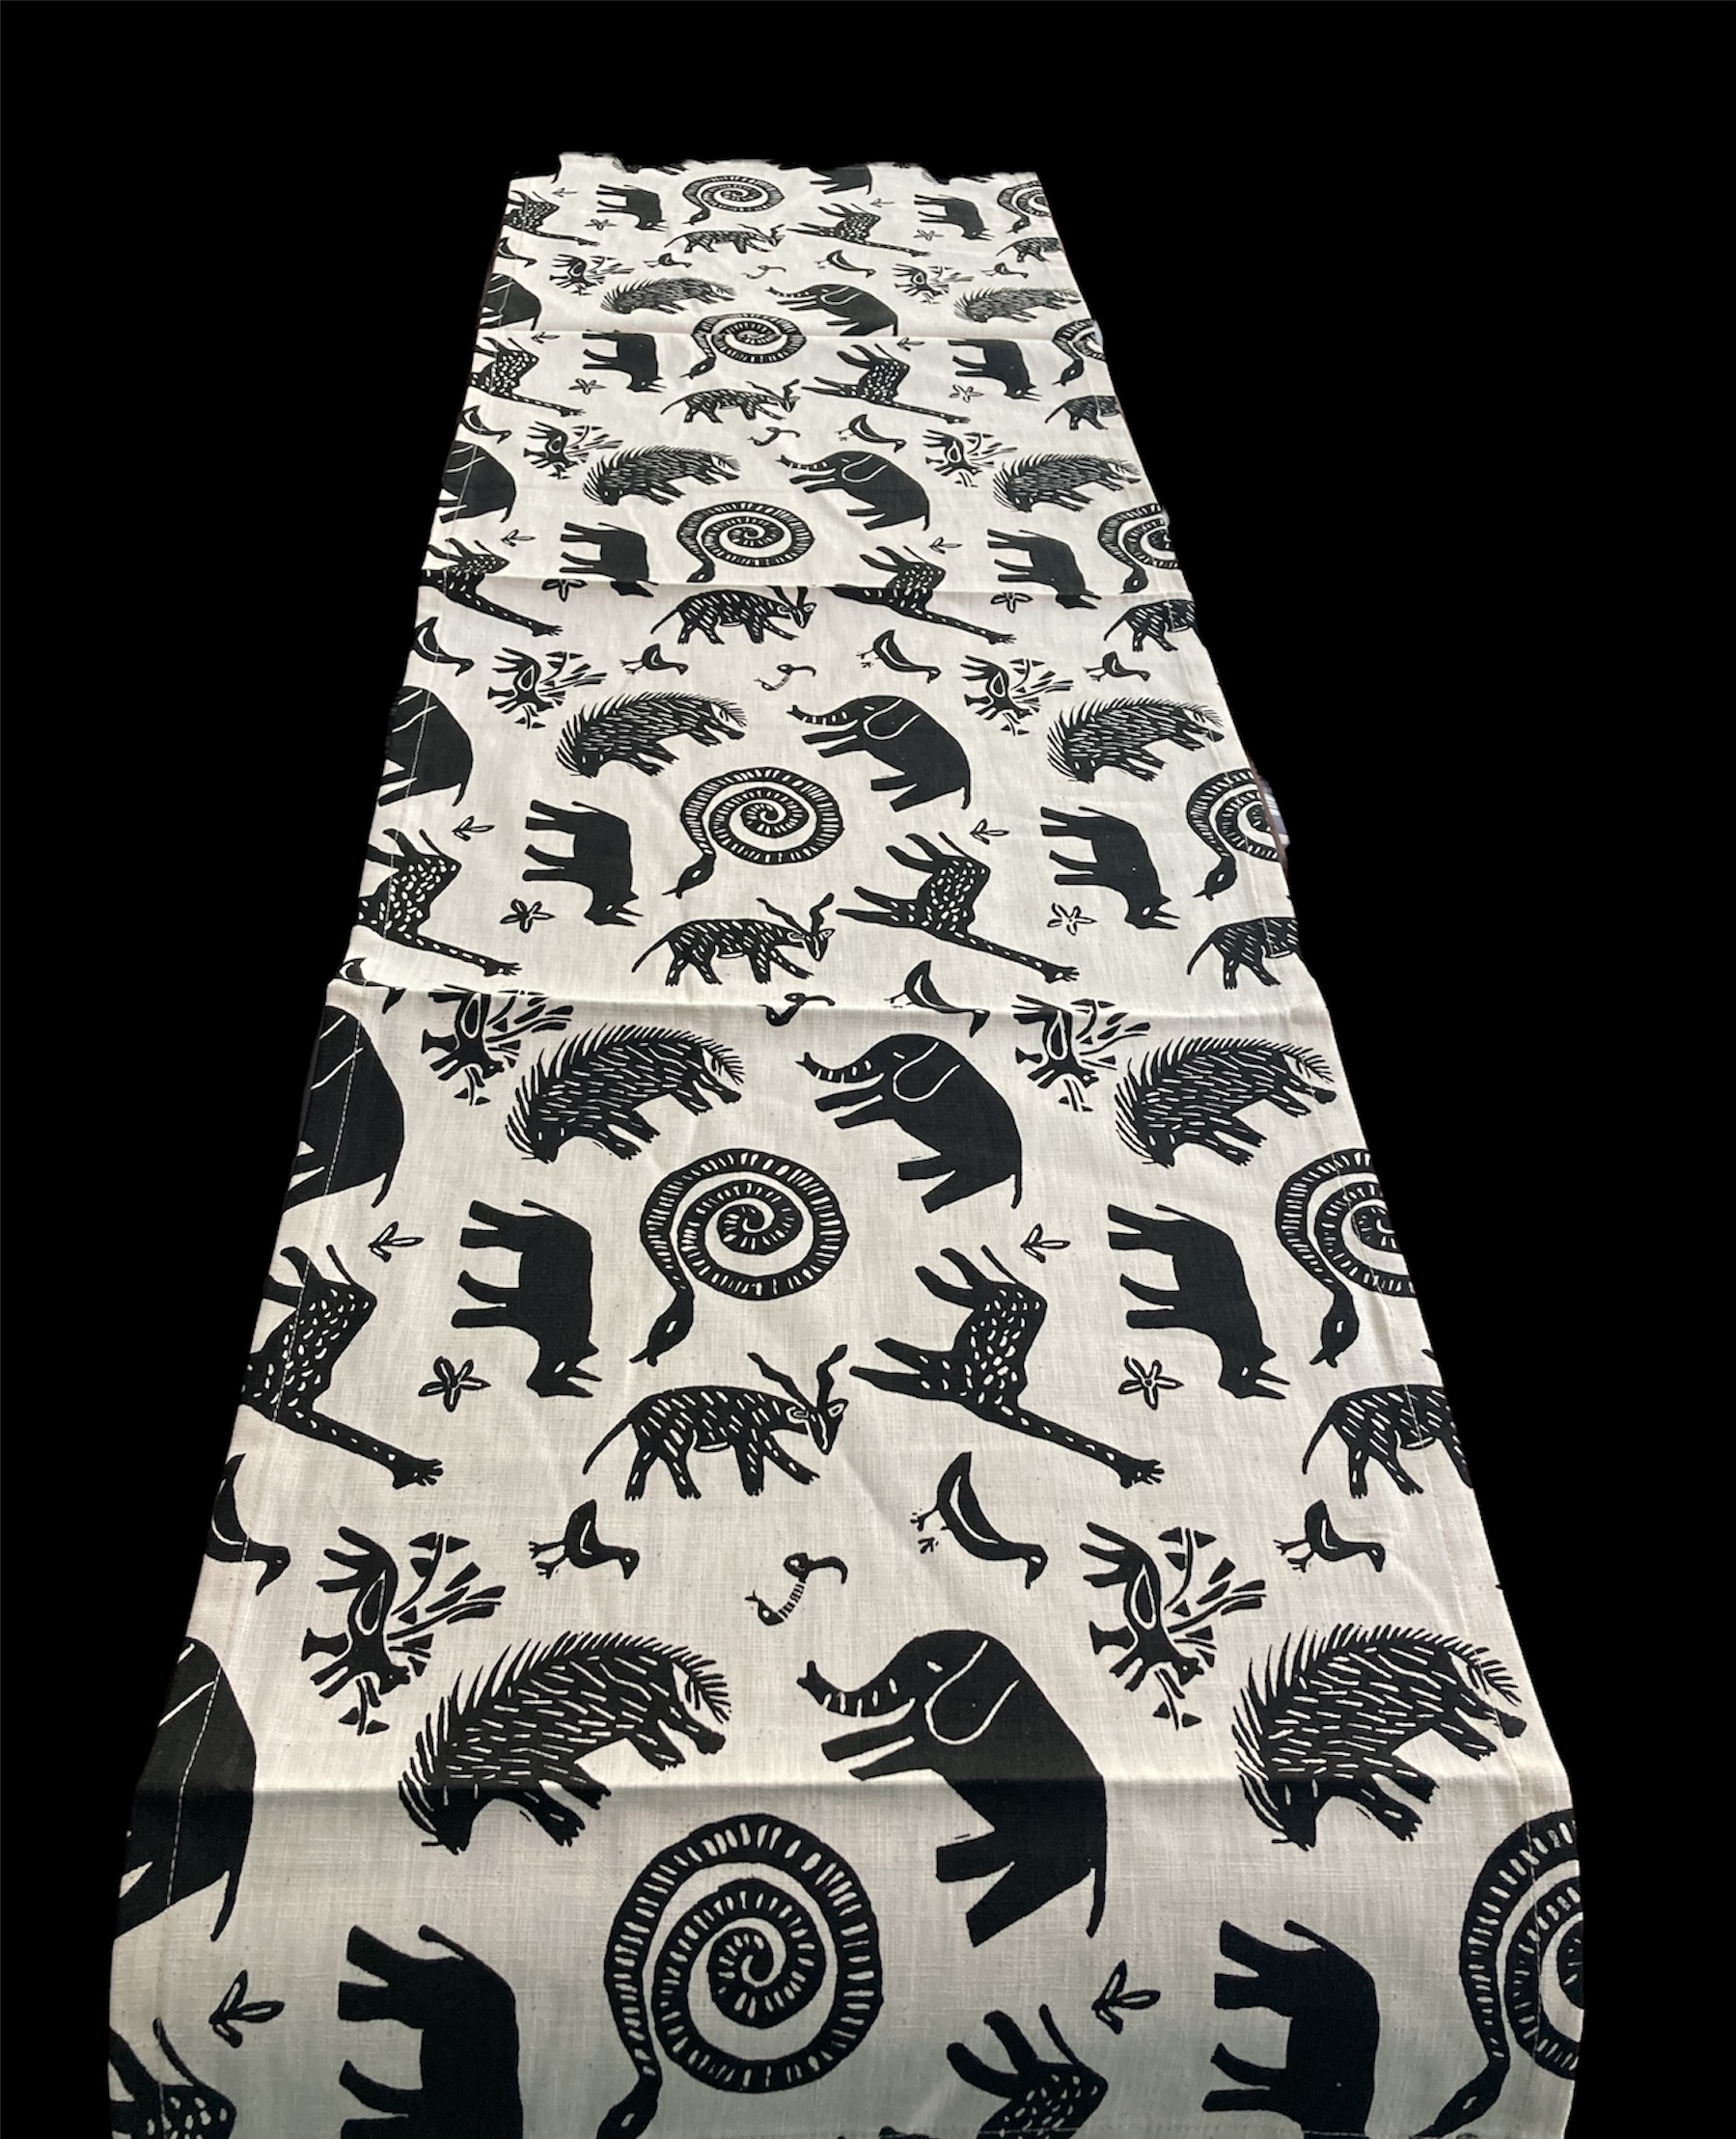 100% cotton Table Runner 58" x 16" from Namibia - Design bw03s